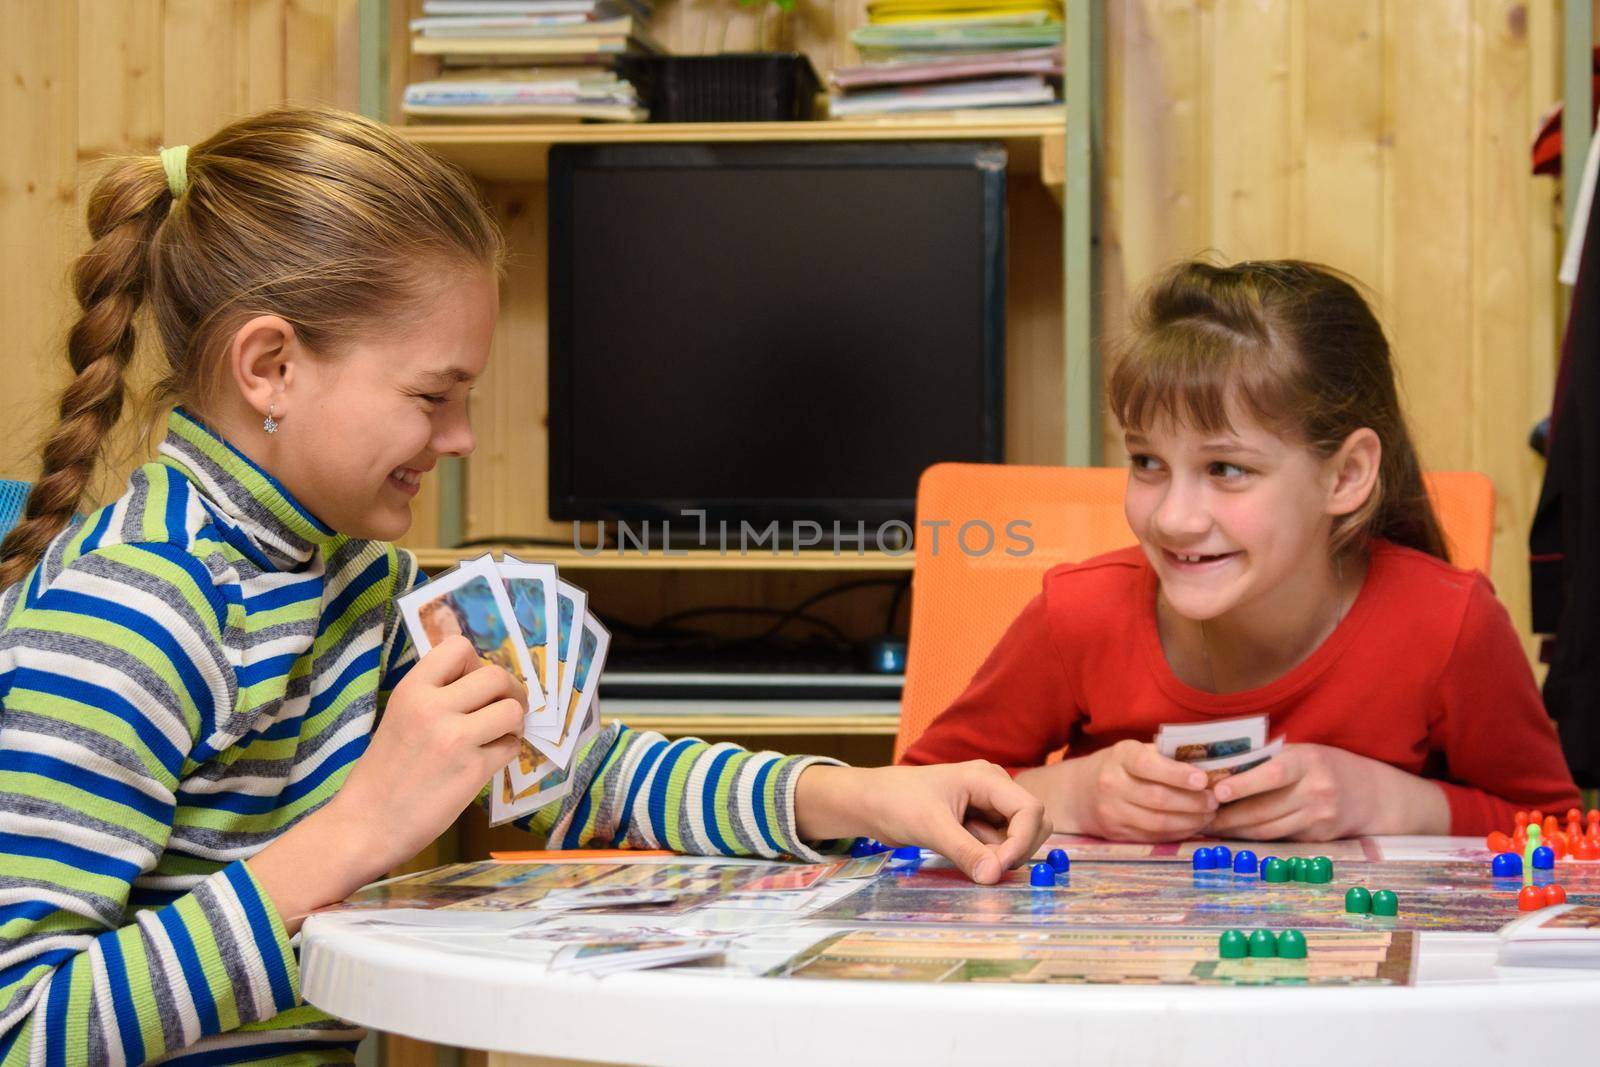 Two girls joyfully laugh while playing board games at the table